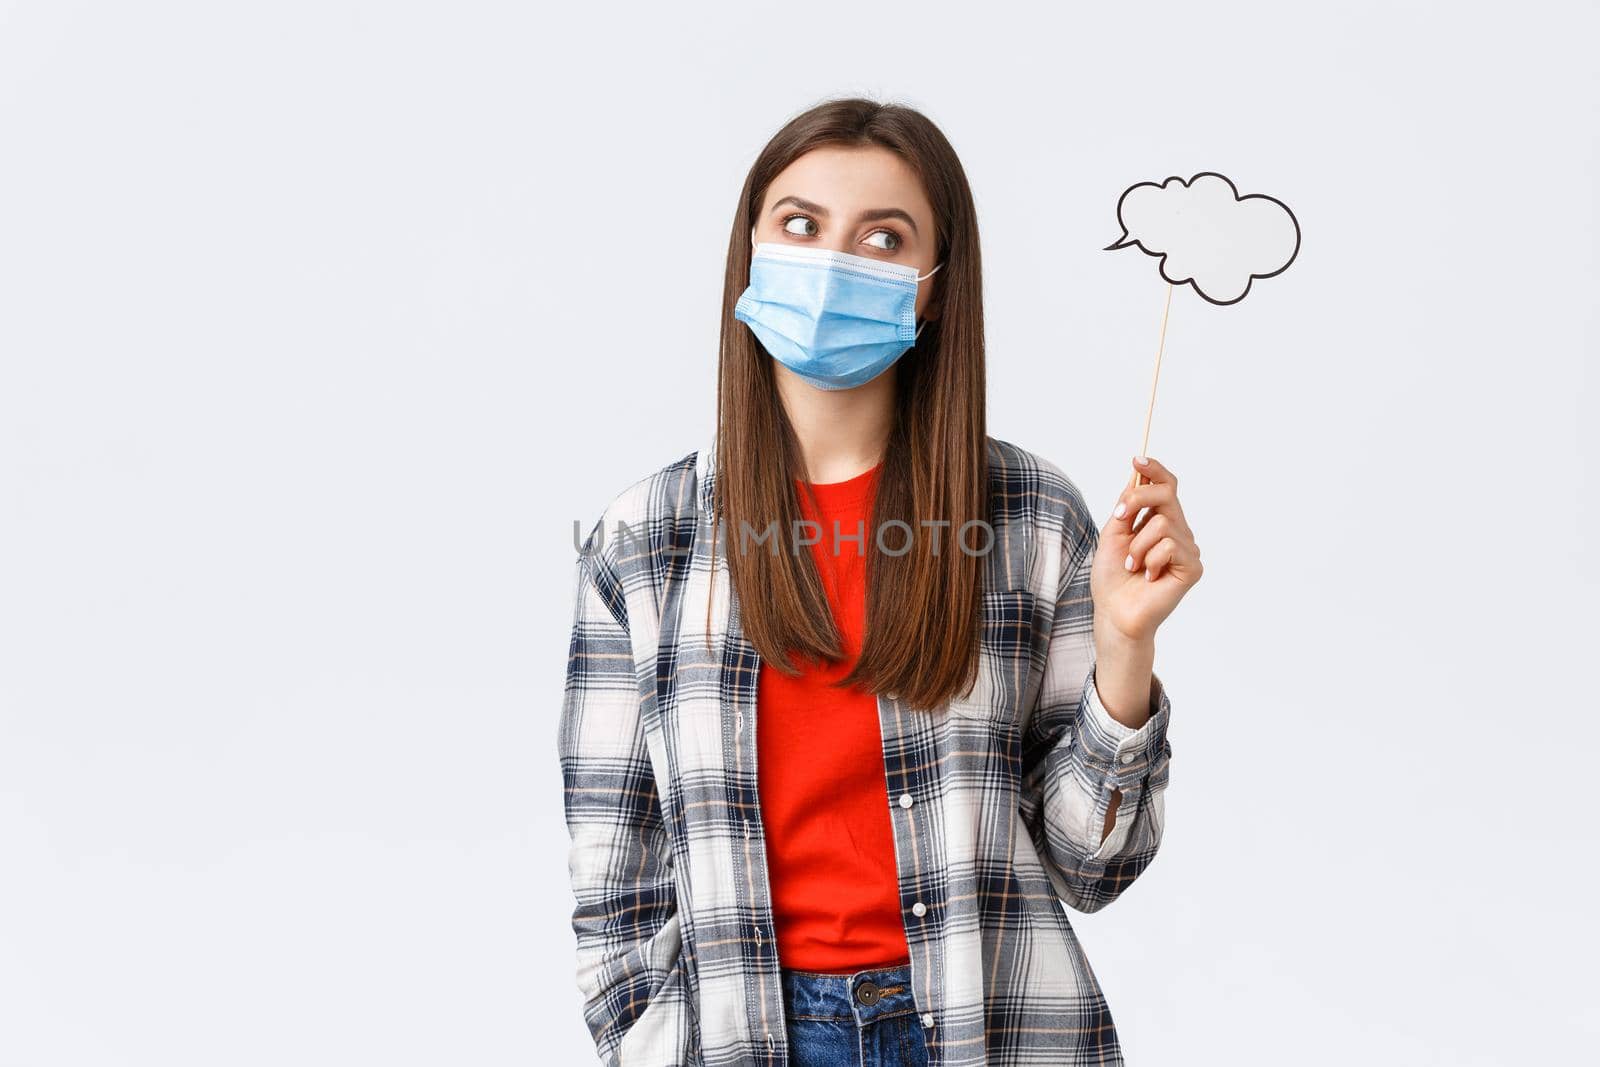 Coronavirus outbreak, leisure on quarantine, social distancing and emotions concept. Thoughtful smart young girl in medical mask searching for inspiration, thinking, holding commend cloud by Benzoix